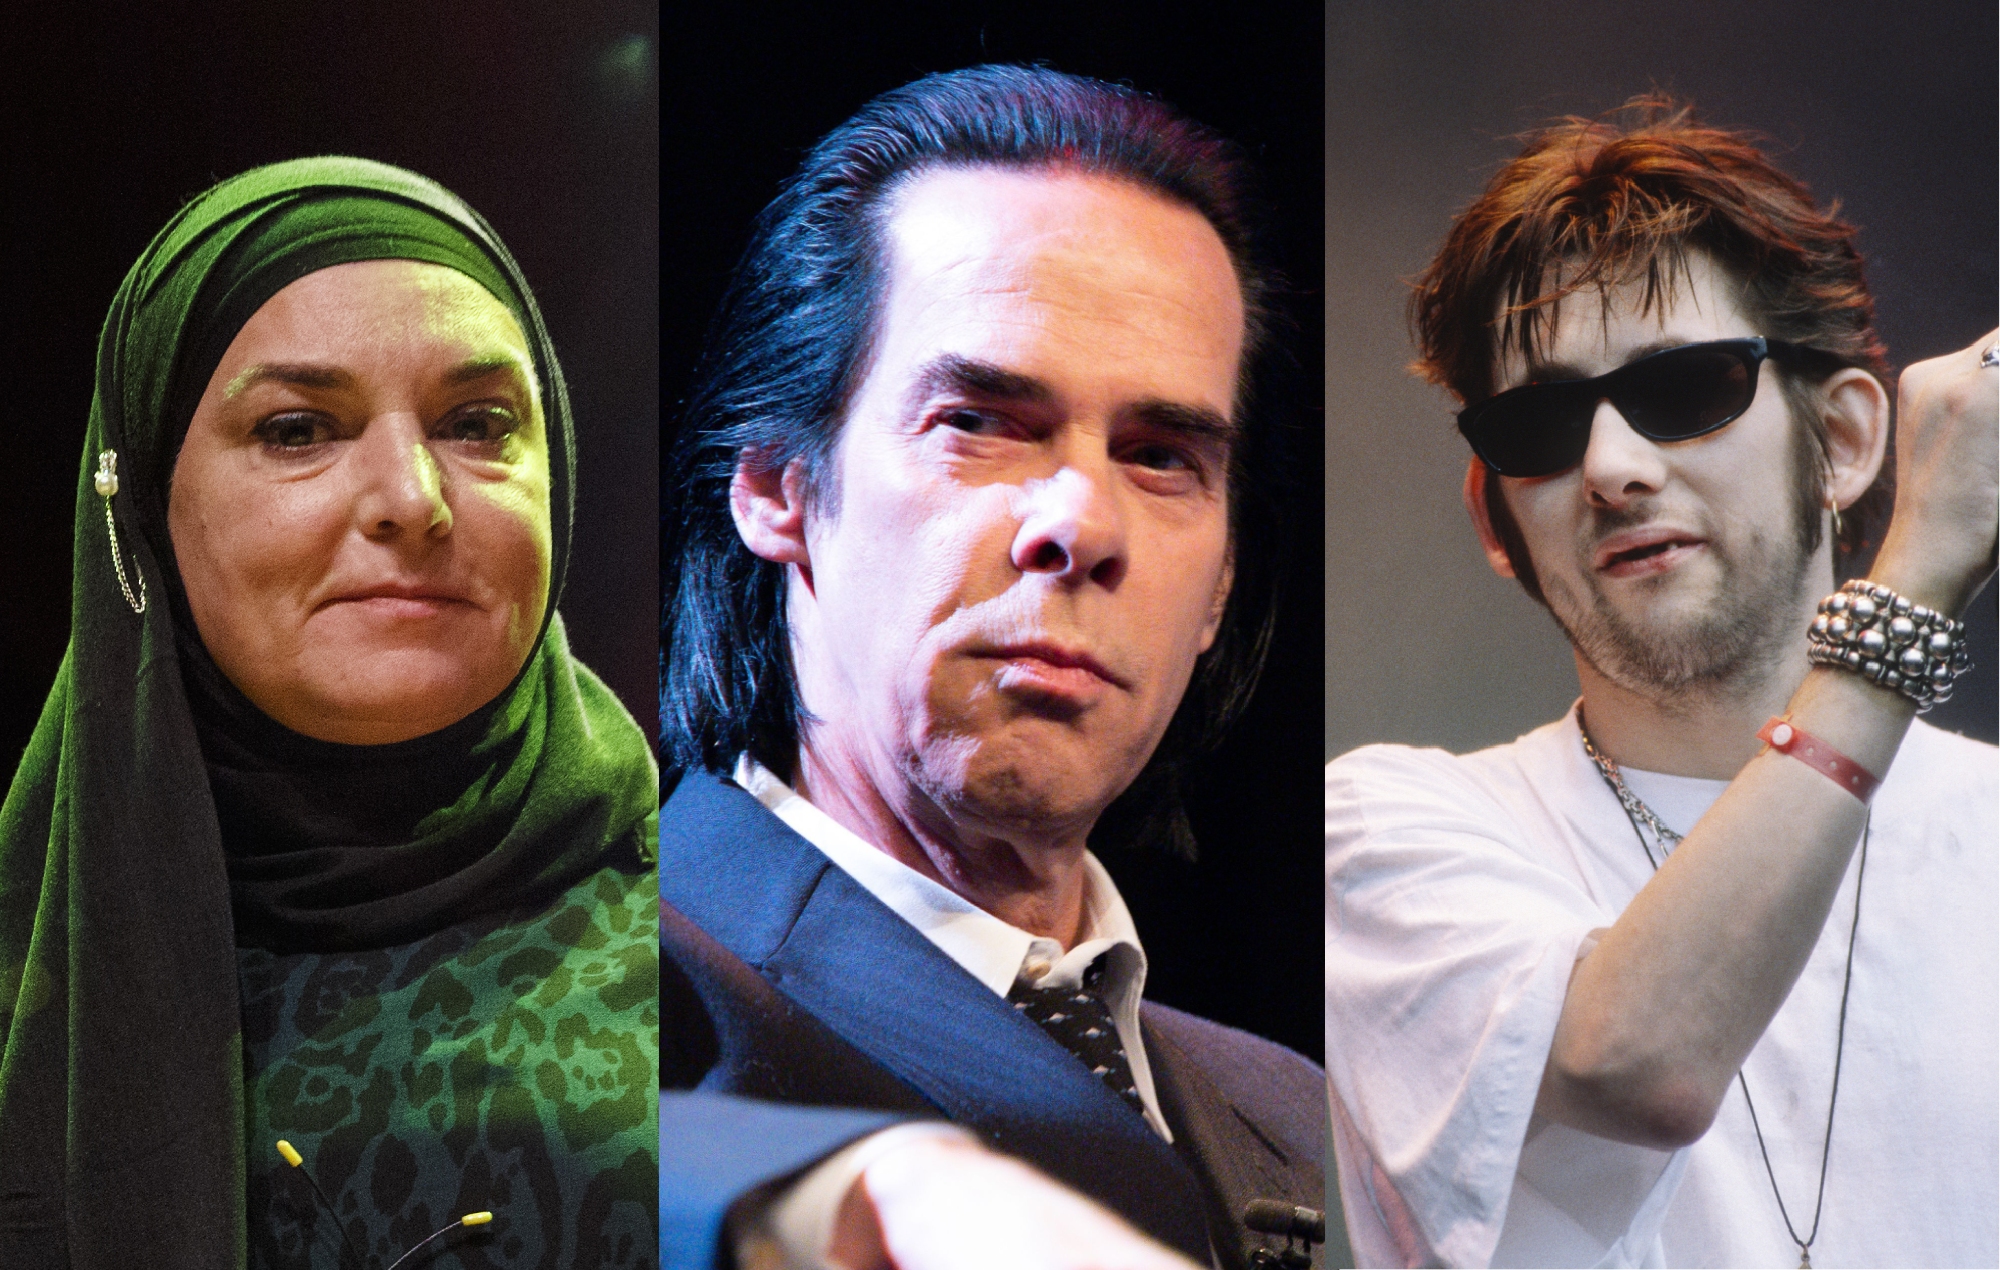 Nick Cave pens heartfelt tribute to Shane MacGowan and Sinéad O’Connor